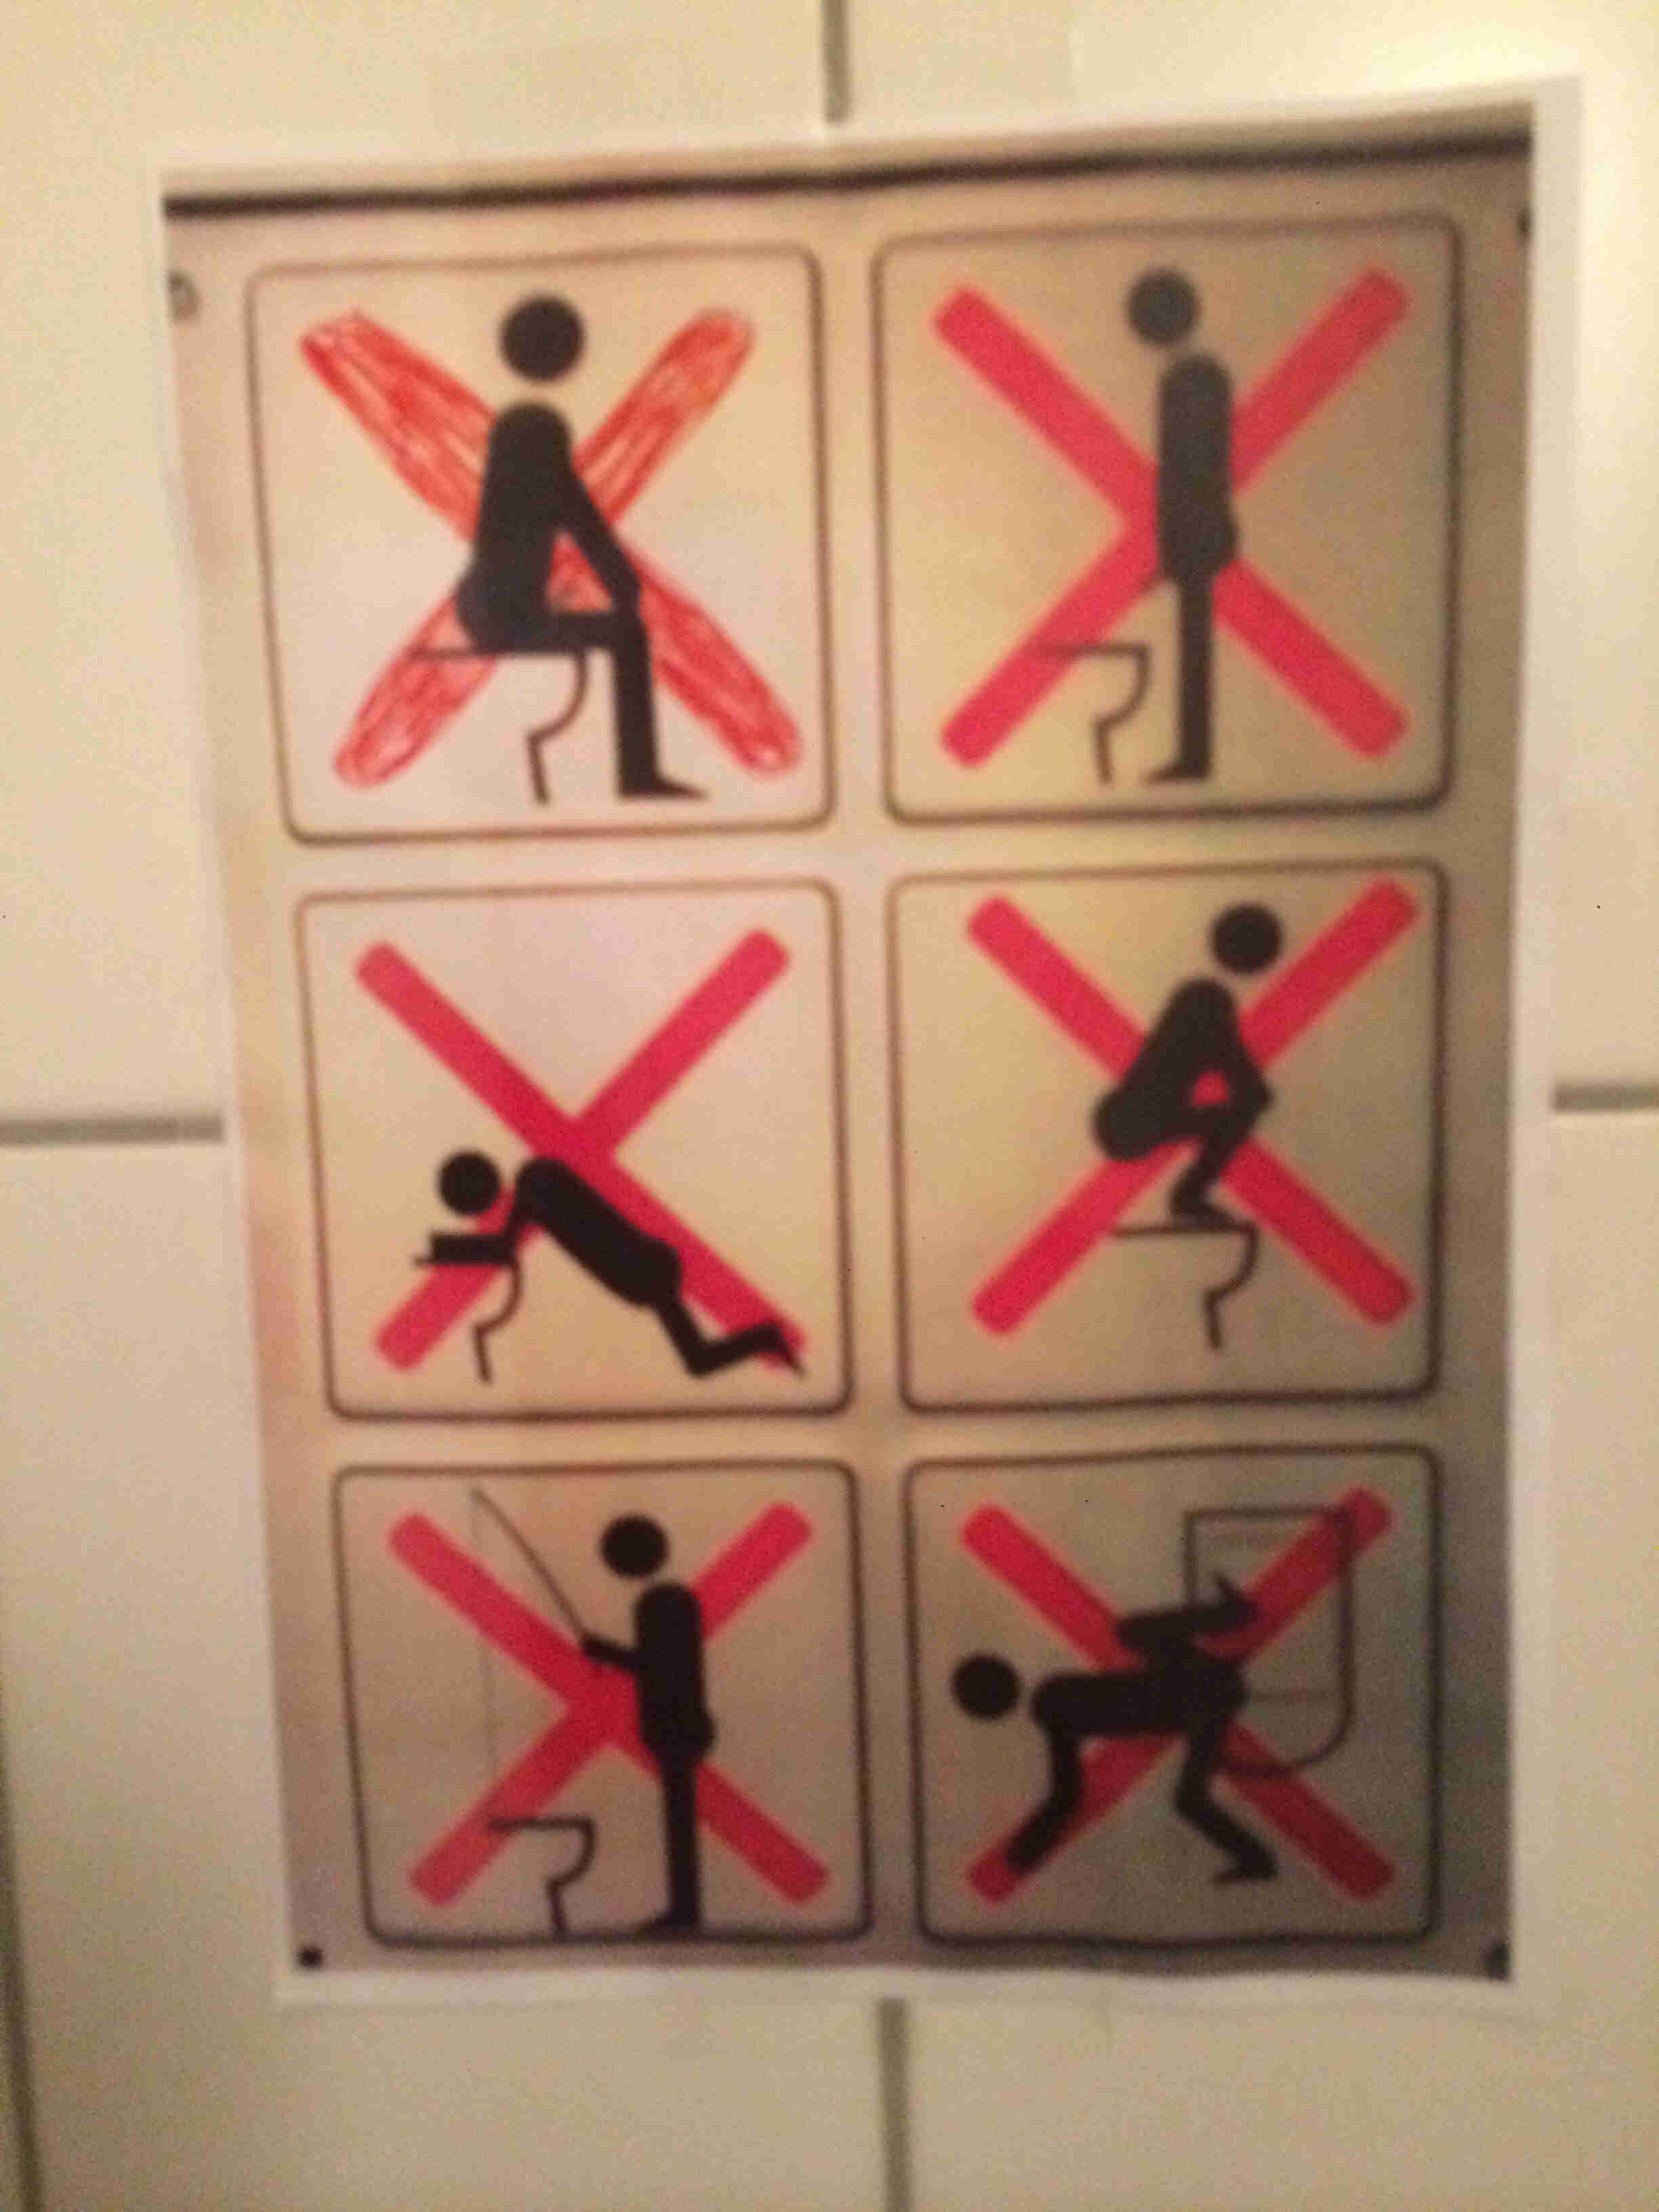 A sign with 6 different graphic blocks with red X's over them, showing people in multiple positions on a toilet